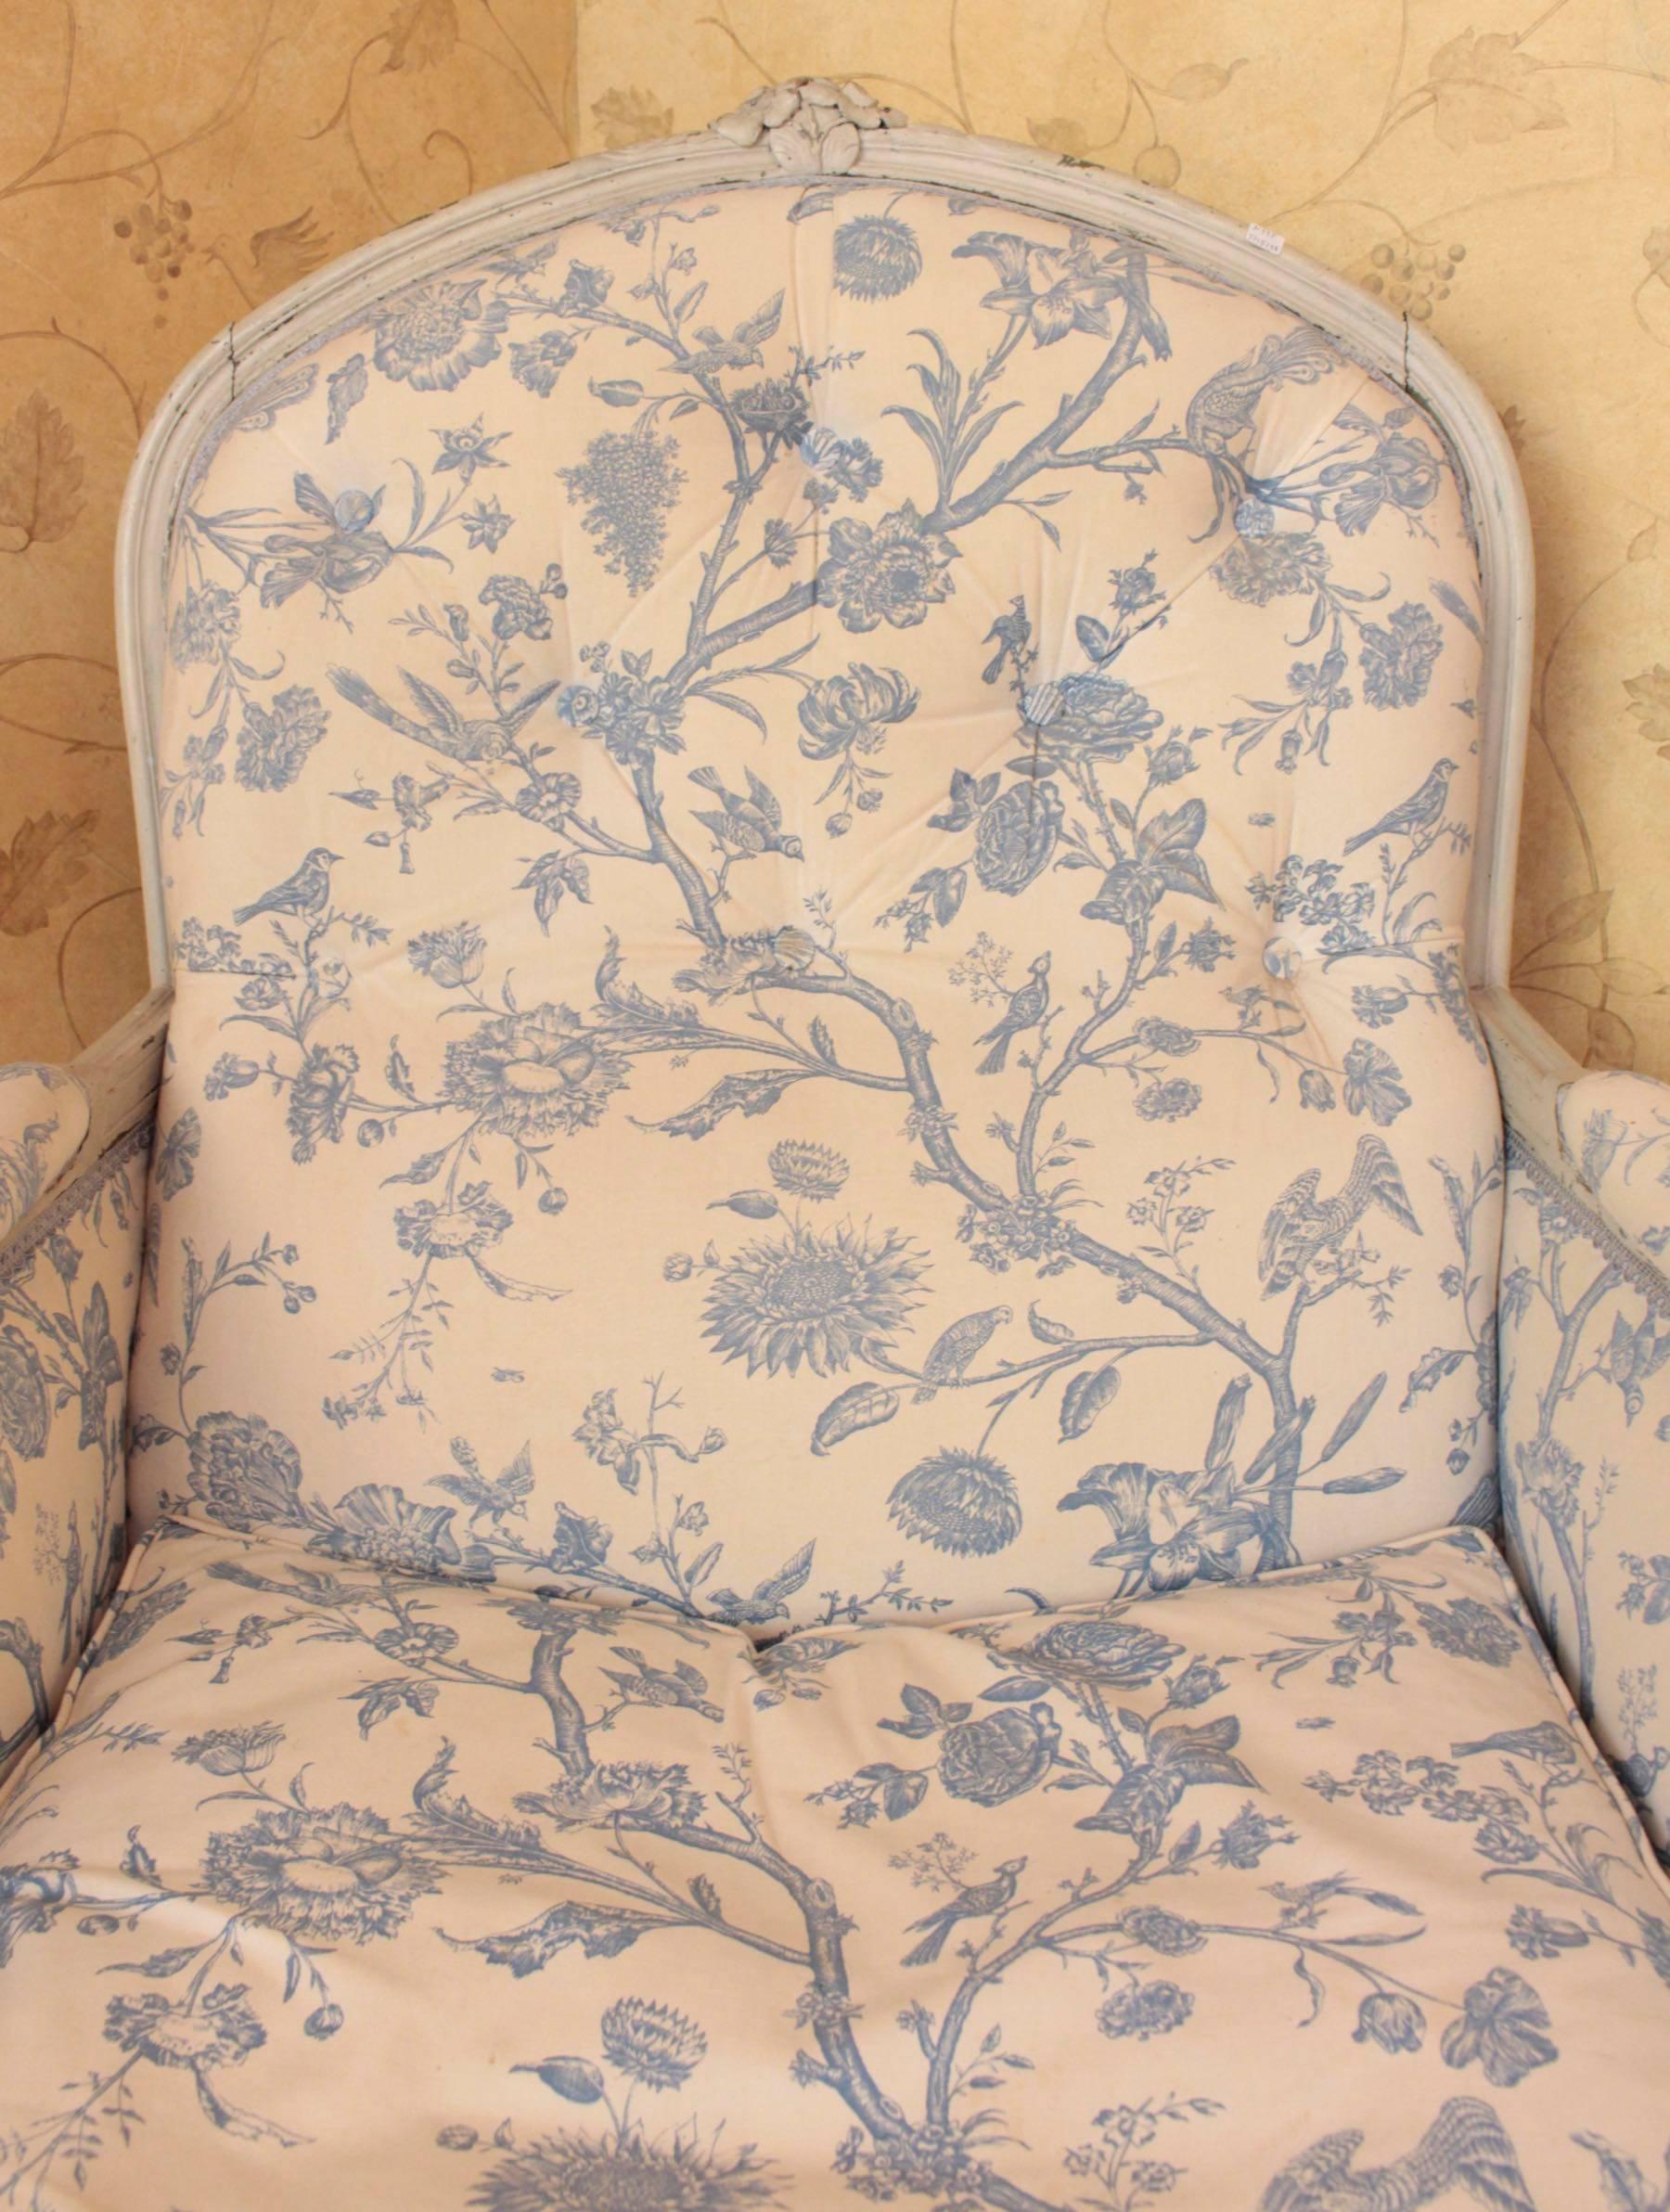 Very large French LXV style bergere chair on cabriole legs, with daisy flowers on the back top, on the front belt and on the legs
The wood frame is lacquered off-white-grey had remain on is original condition
as well as the upholstery.